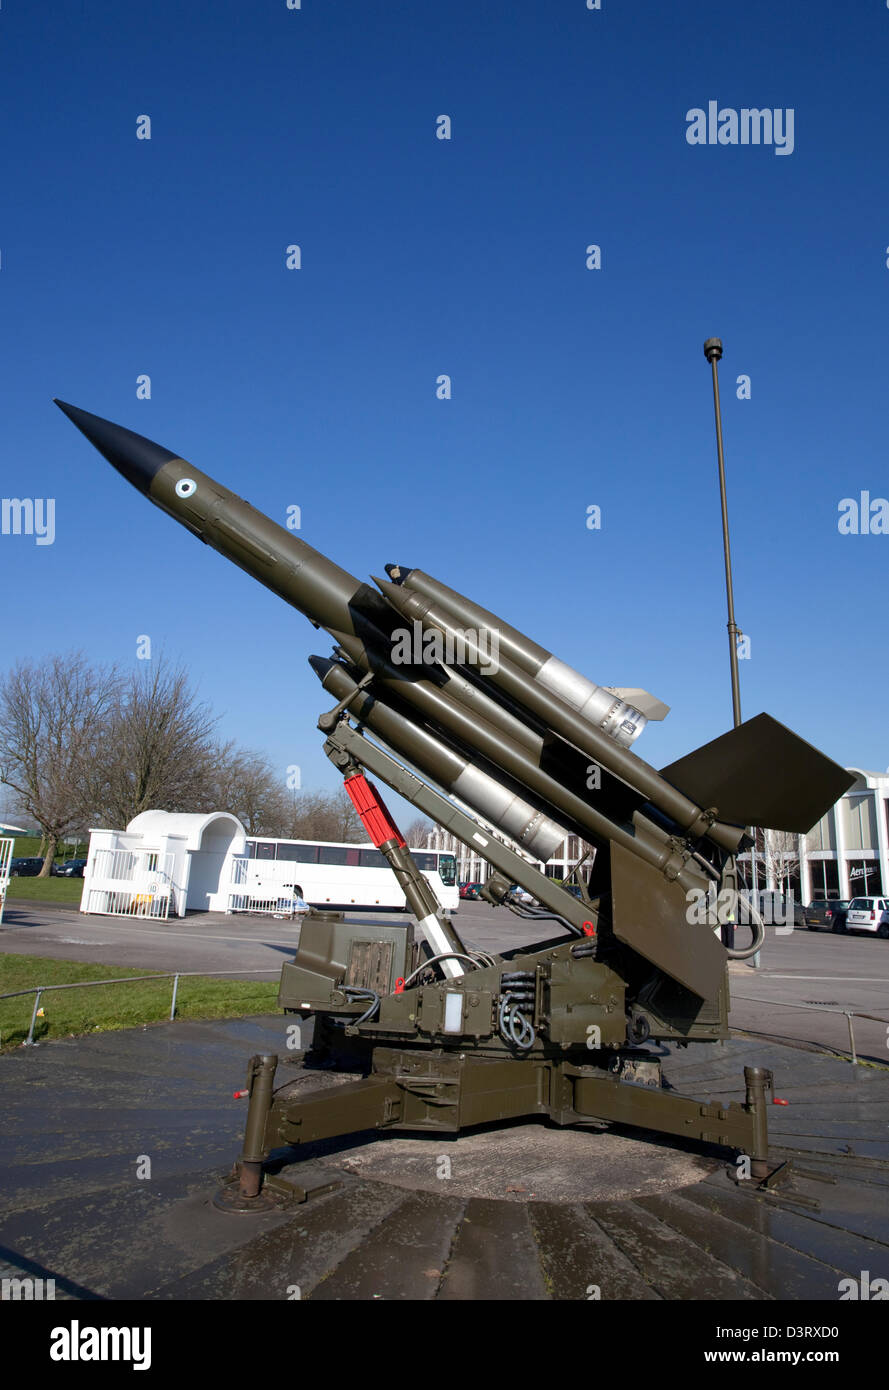 Bloodhound missile system on display at the Royal Air Force London Museum, Colindale, London, England, UK Stock Photo